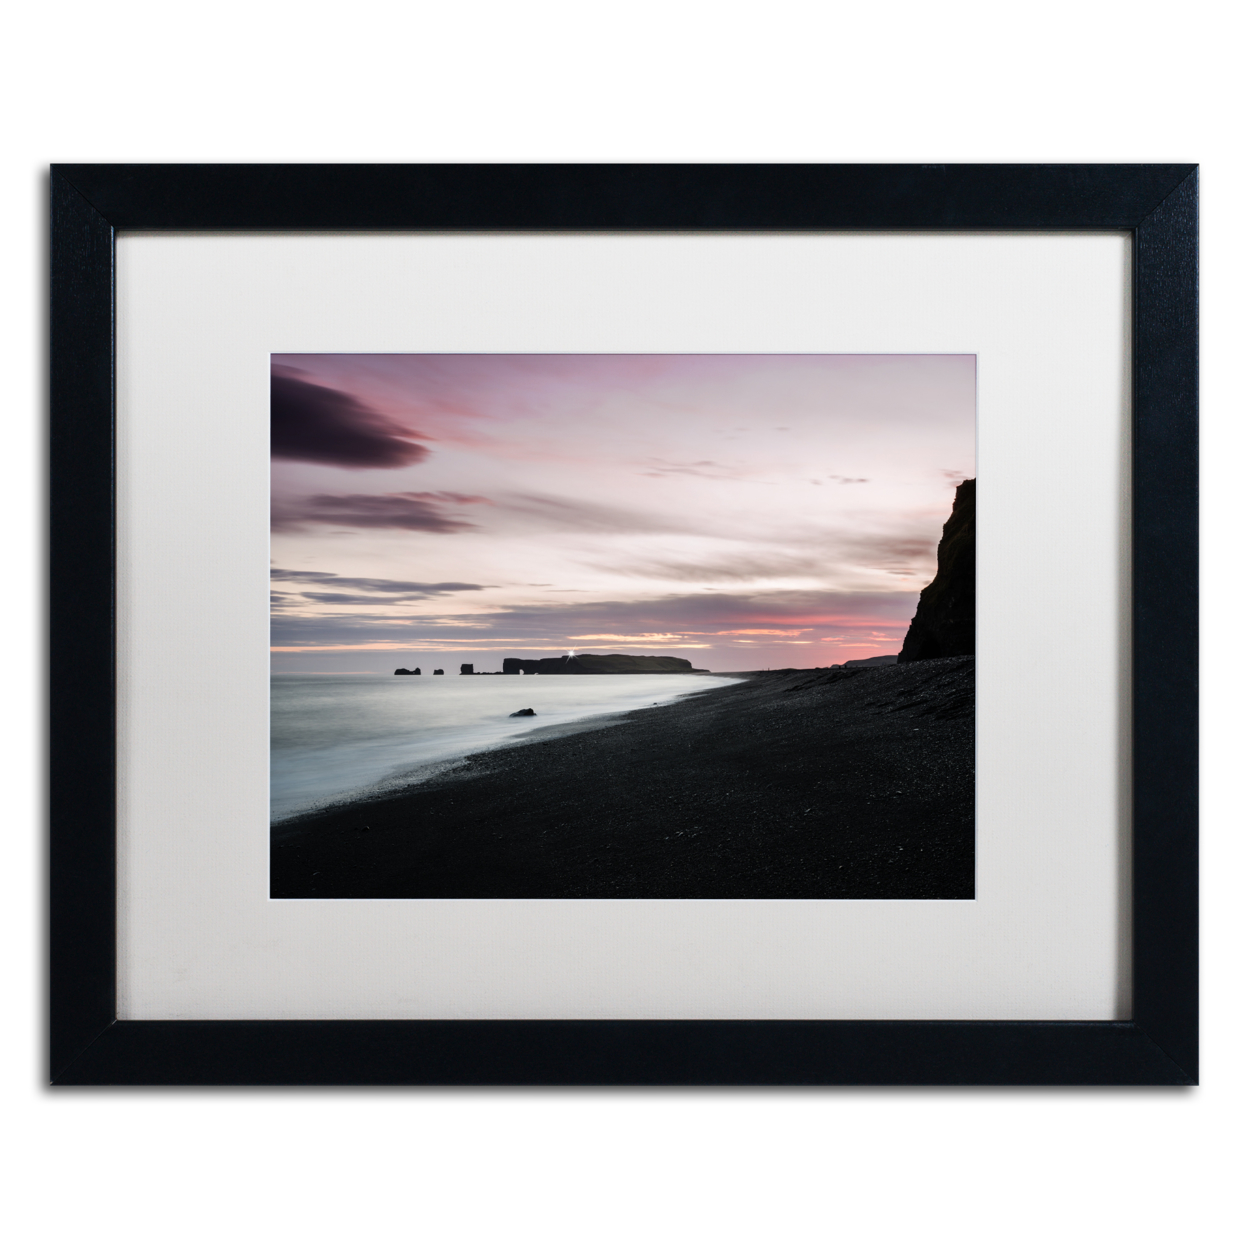 Philippe Sainte-Laudy 'Sunset At Dyrholaey' Black Wooden Framed Art 18 X 22 Inches